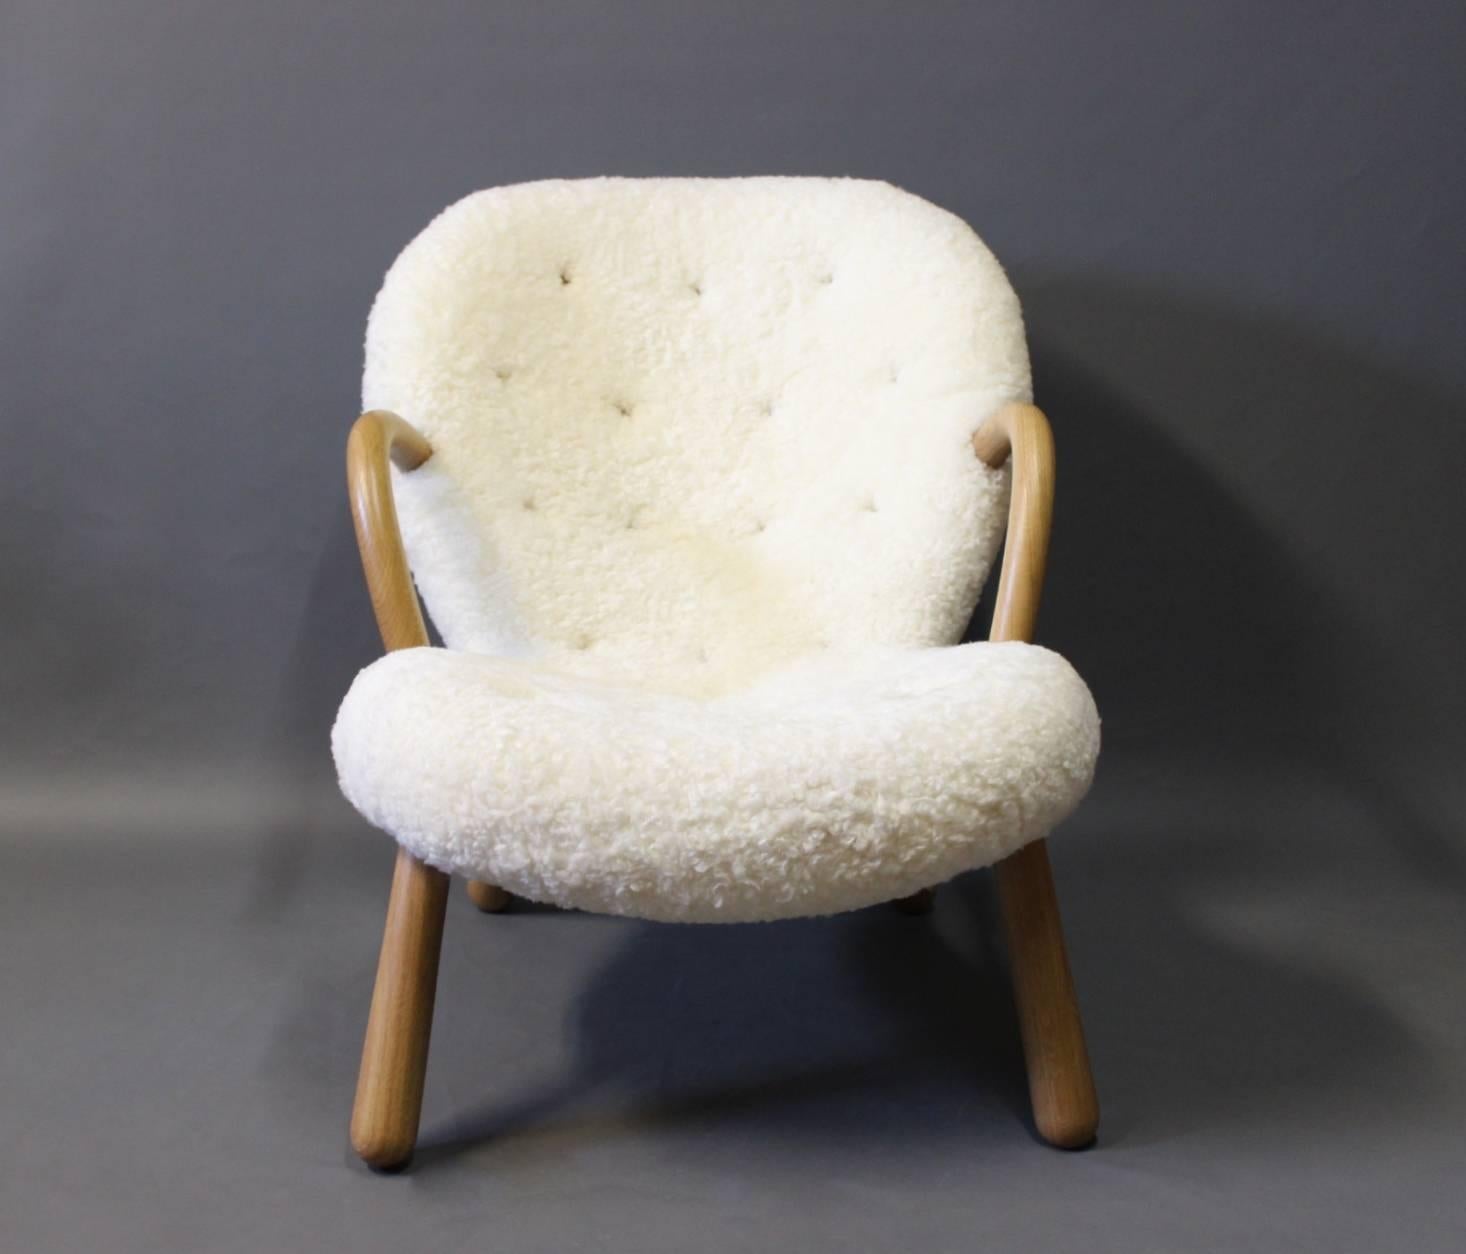 The clam chair originally designed by Phillip Arctander in 1944 and manufactured by Paustian in 2016. The chair is upholstered in sheepskin and with arms and legs of oak.